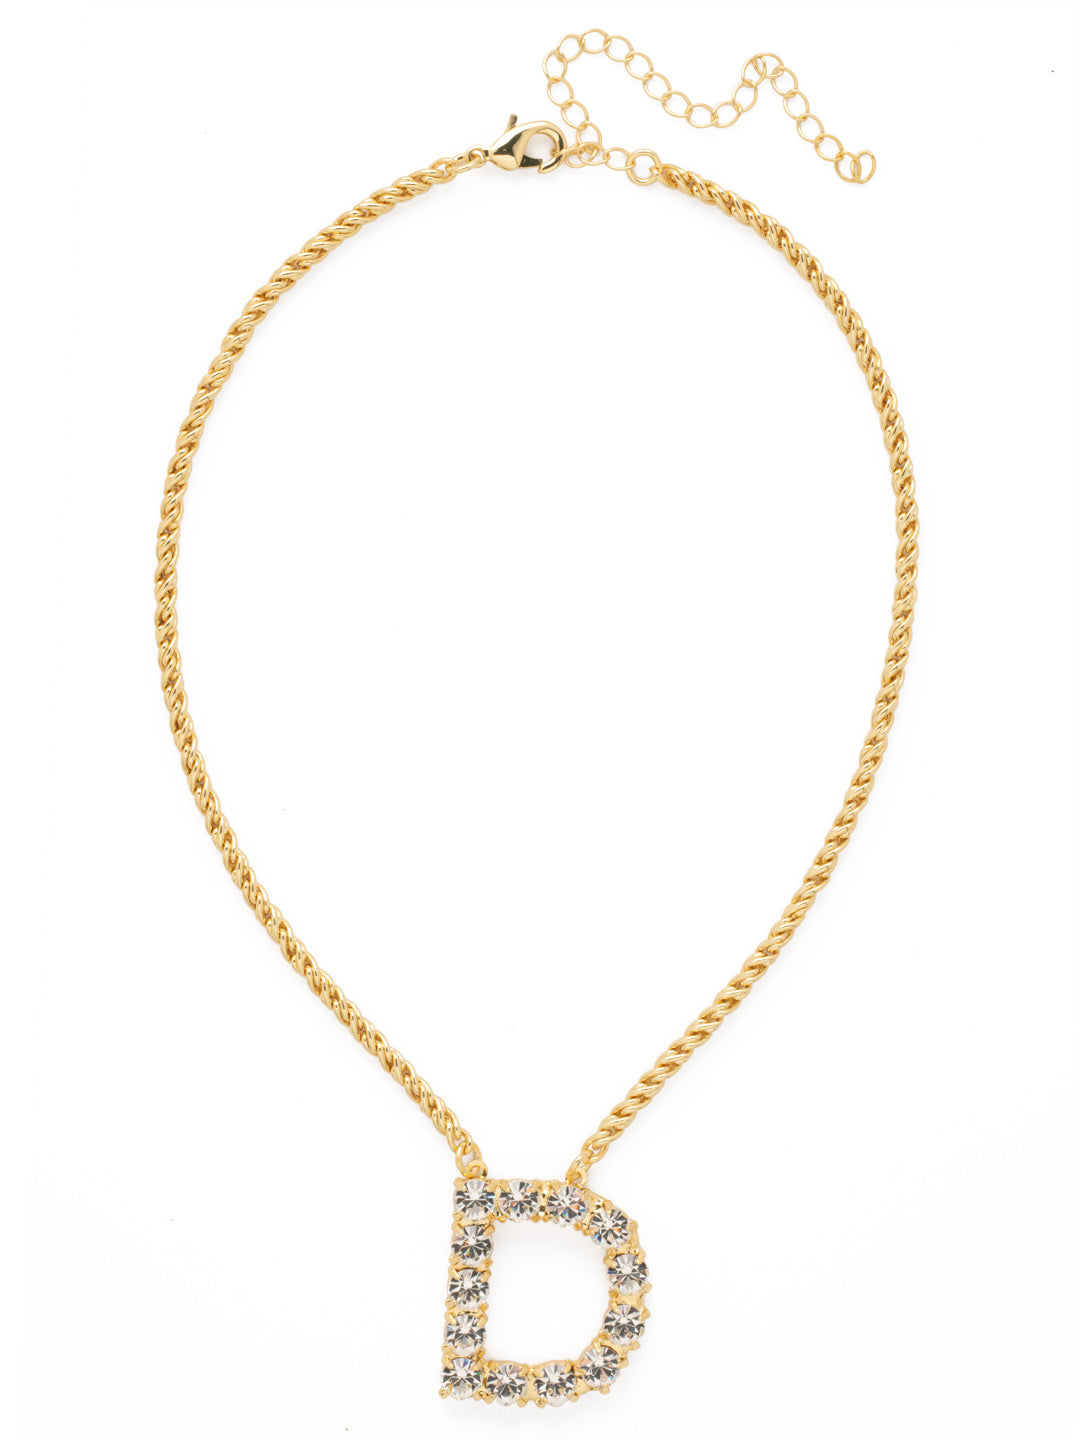 D Initial Rope Pendant Necklace - NFK23BGCRY - <p>The Initial Rope Pendant Necklace features a crystal encrusted metal monogram pendant on an adjustable rope chain, secured with a lobster claw clasp. From Sorrelli's Crystal collection in our Bright Gold-tone finish.</p>